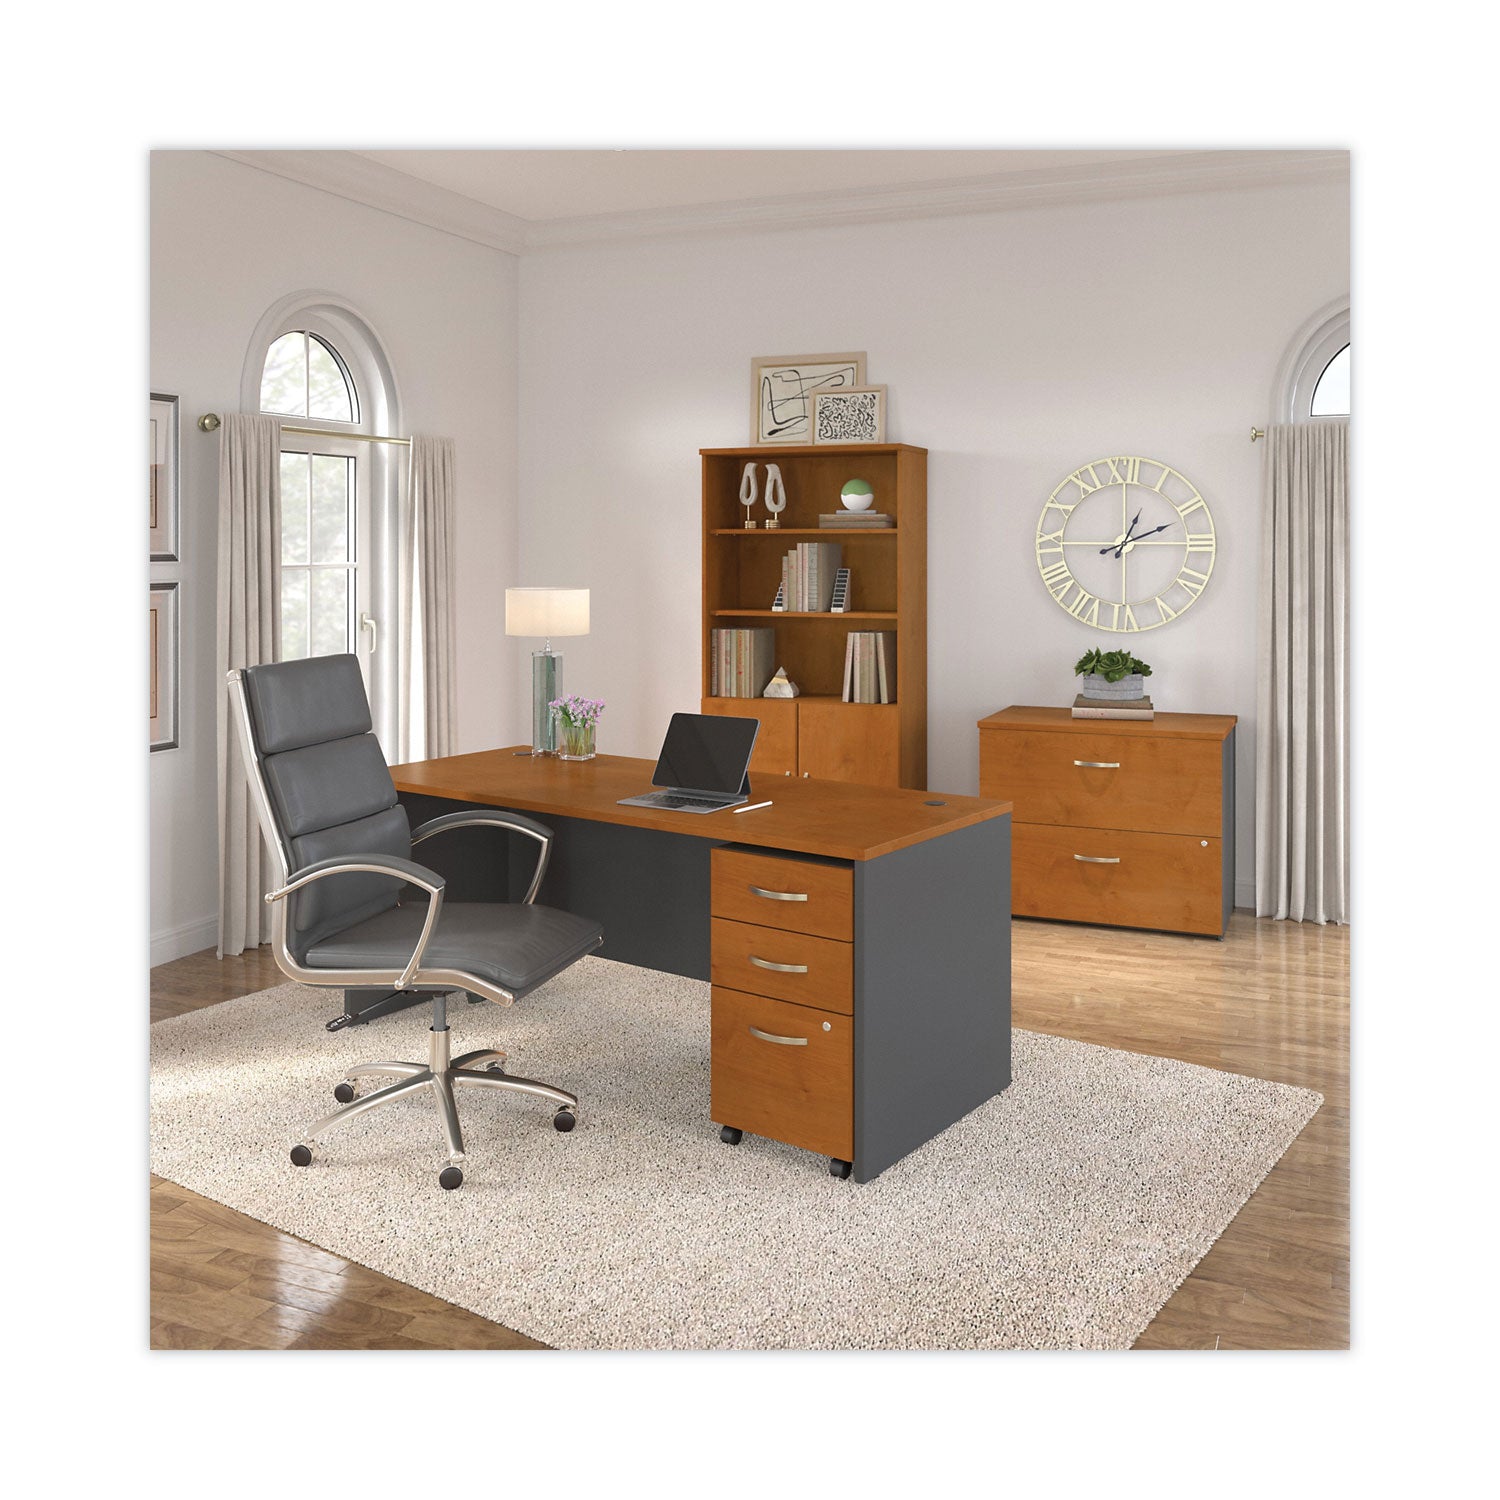 Series C Collection Desk Shell, 71.13" x 29.38" x 29.88", Natural Cherry/Graphite Gray - 